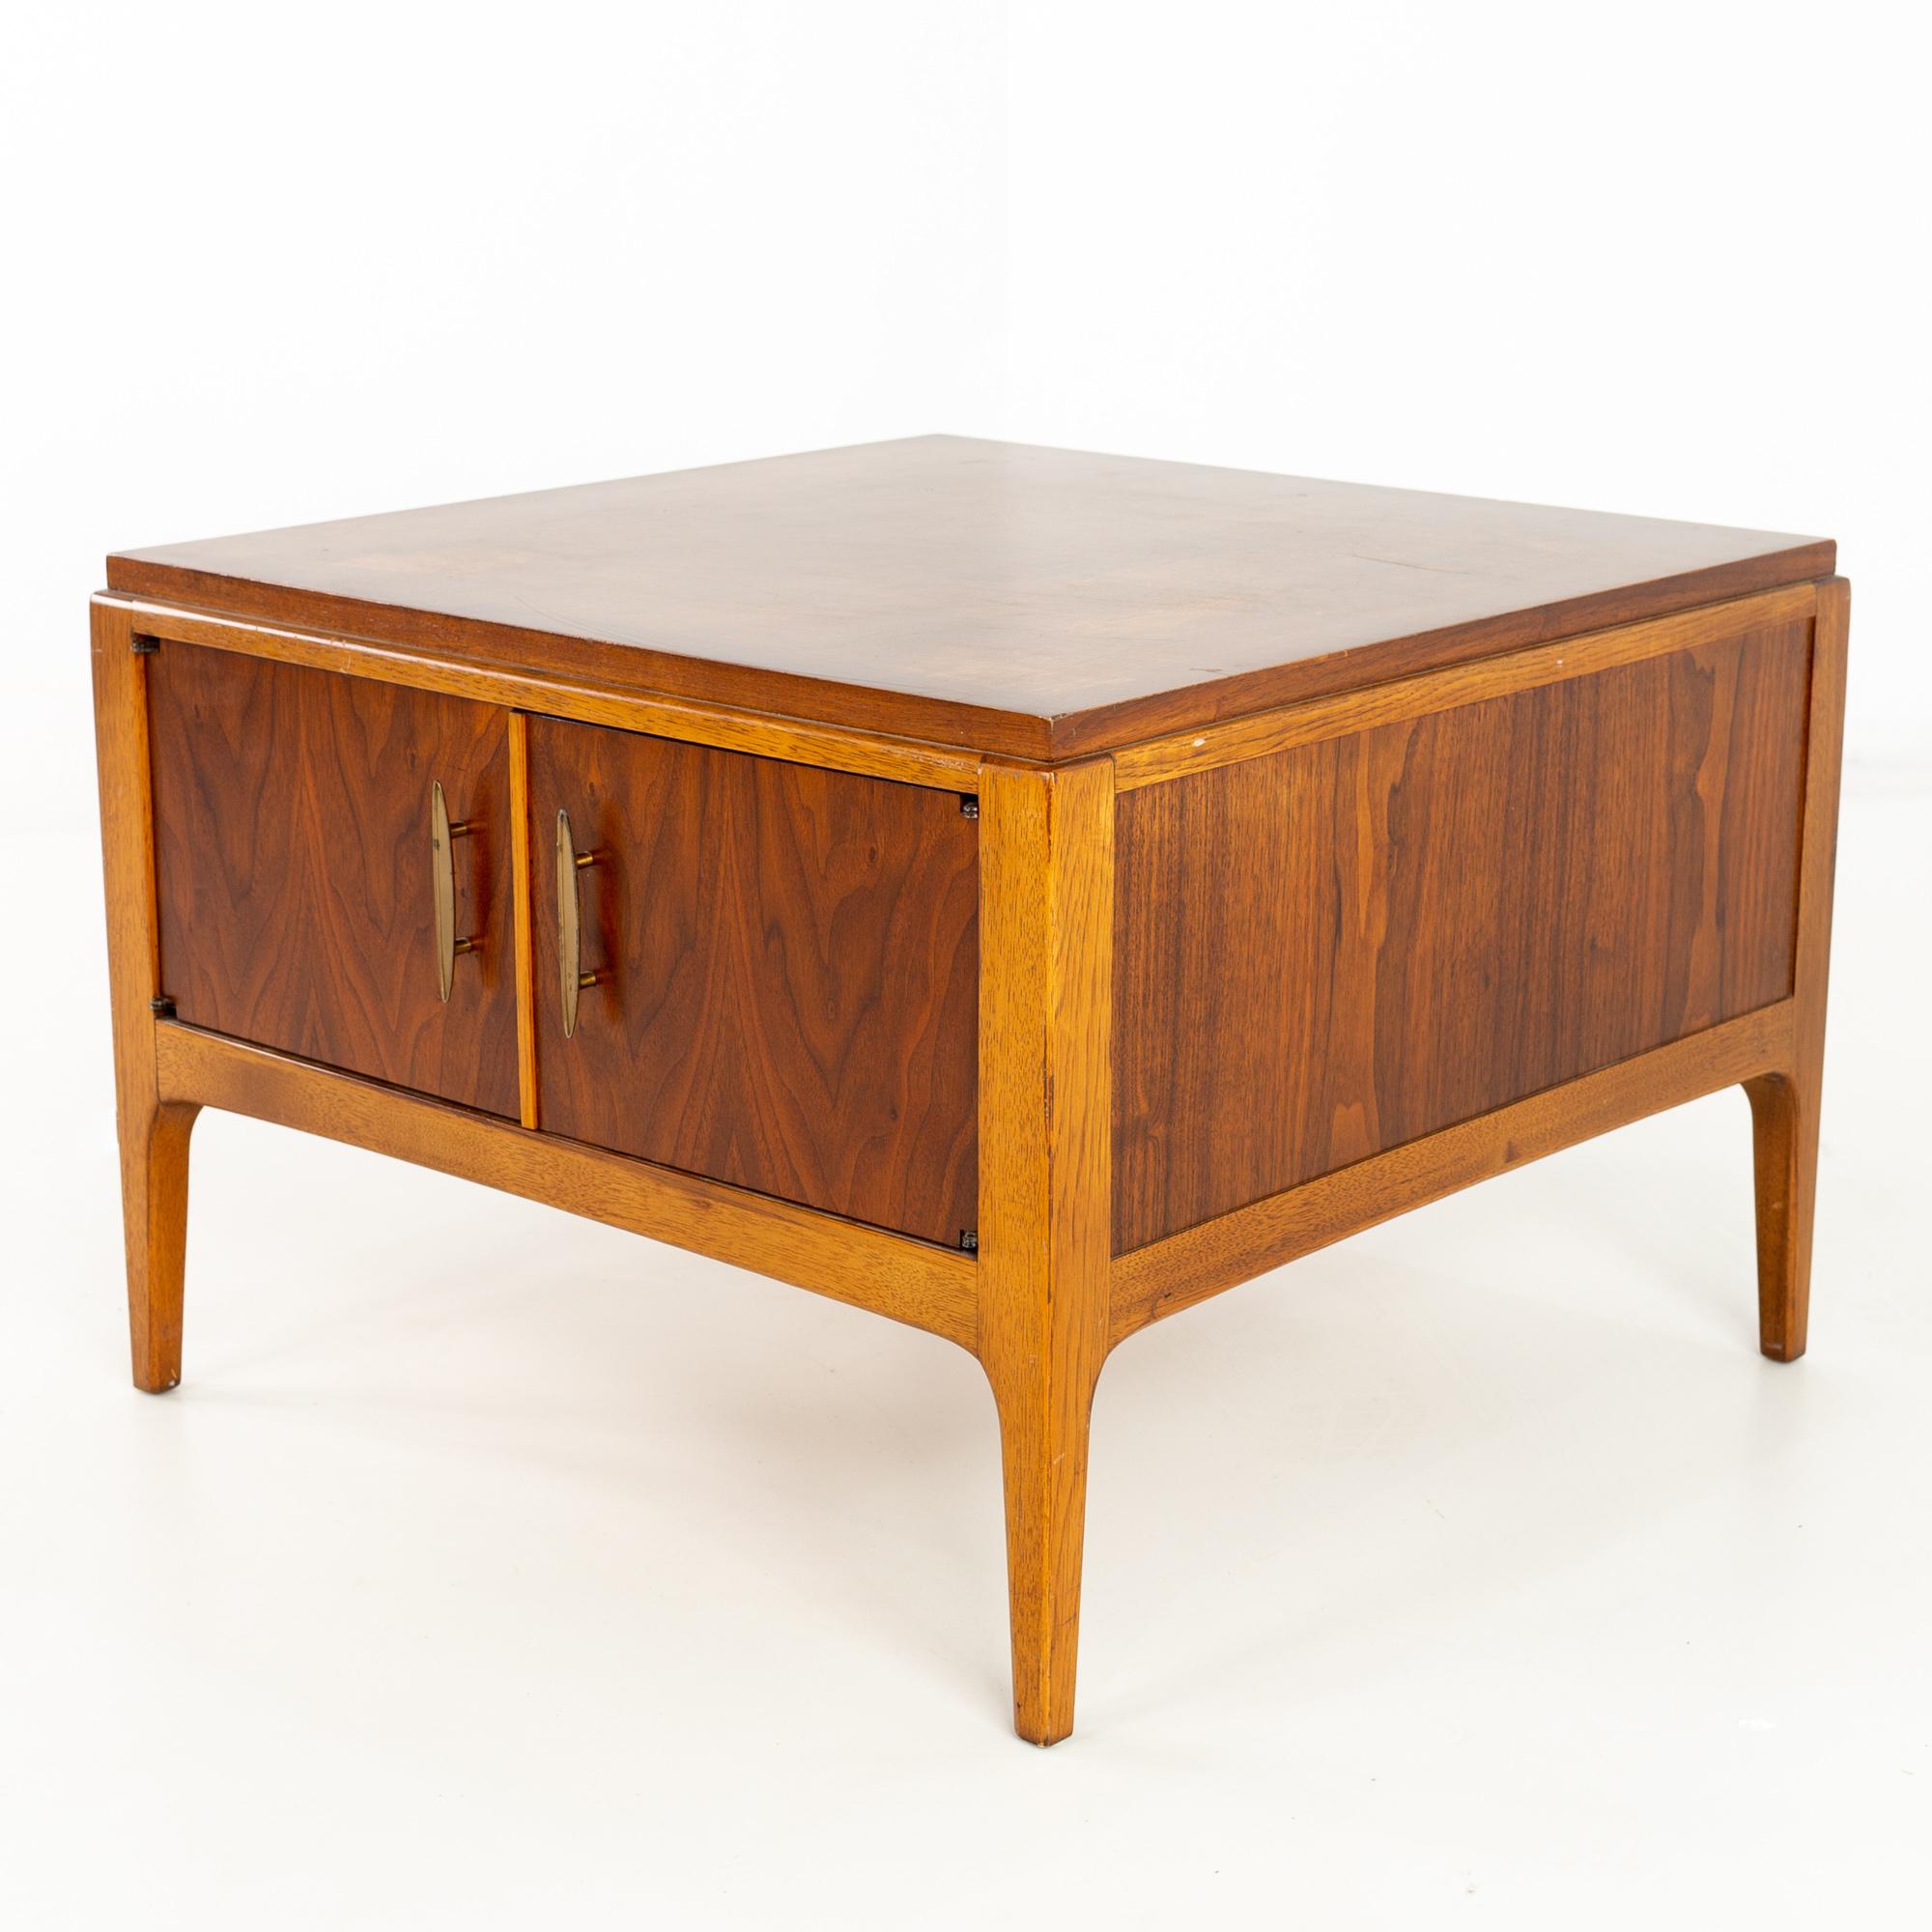 Paul McCobb Style Lane Rhythm mid century walnut nightstand side end table 

This side table measures: 28.5 wide x 28.5 deep x 20.25 inches high

All pieces of furniture can be had in what we call restored vintage condition. That means the piece is